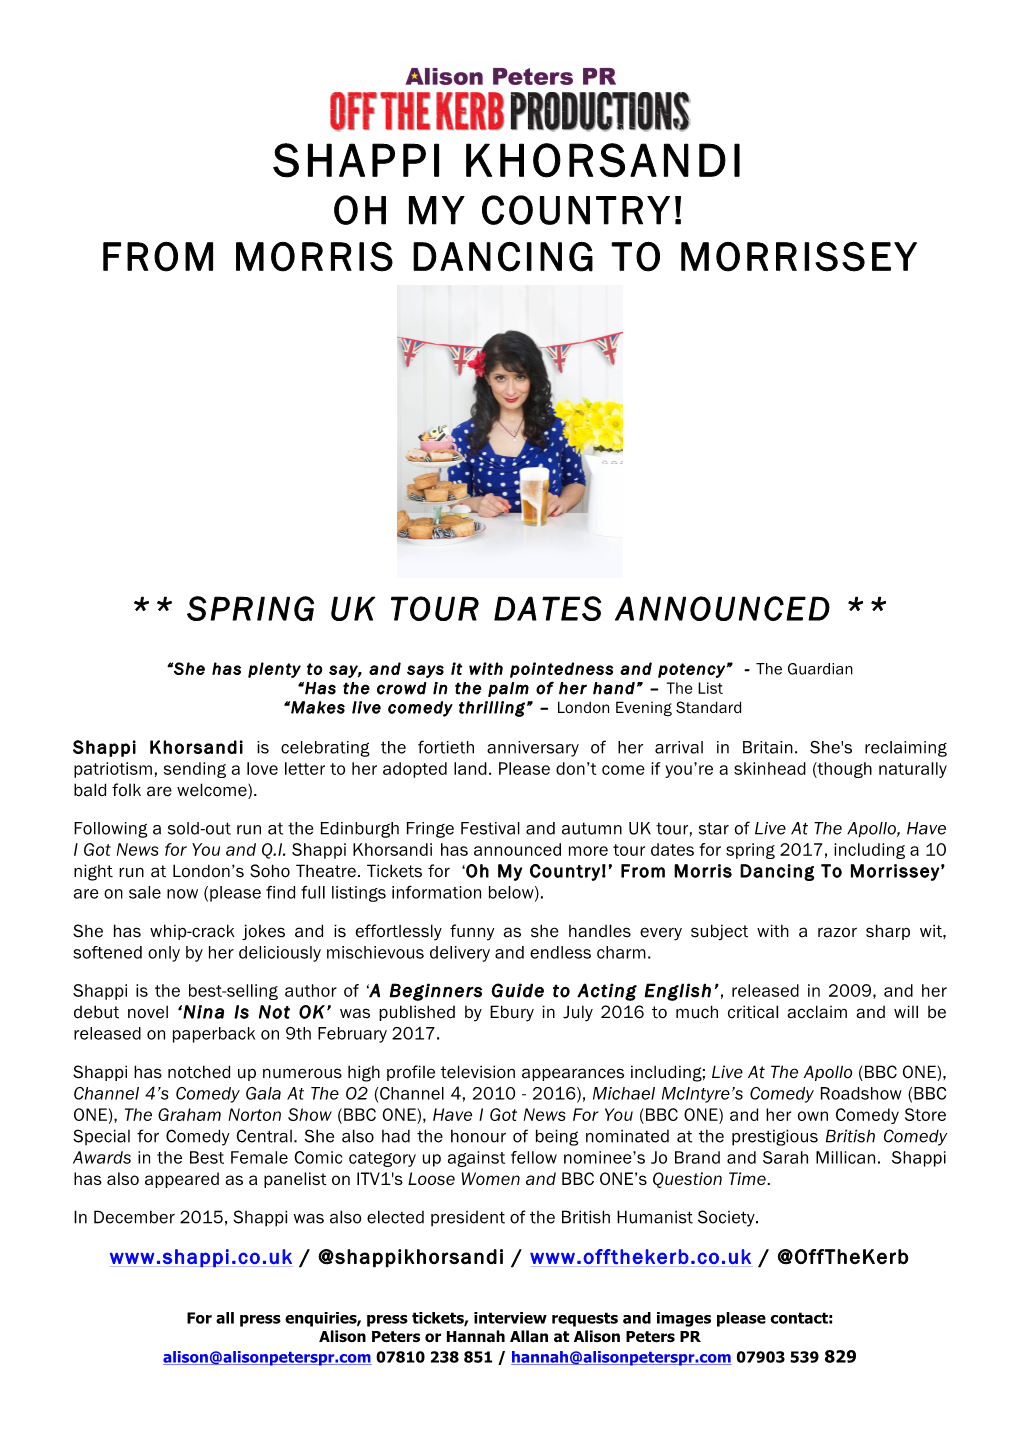 Shappi Khorsandi Oh My Country! from Morris Dancing to Morrissey